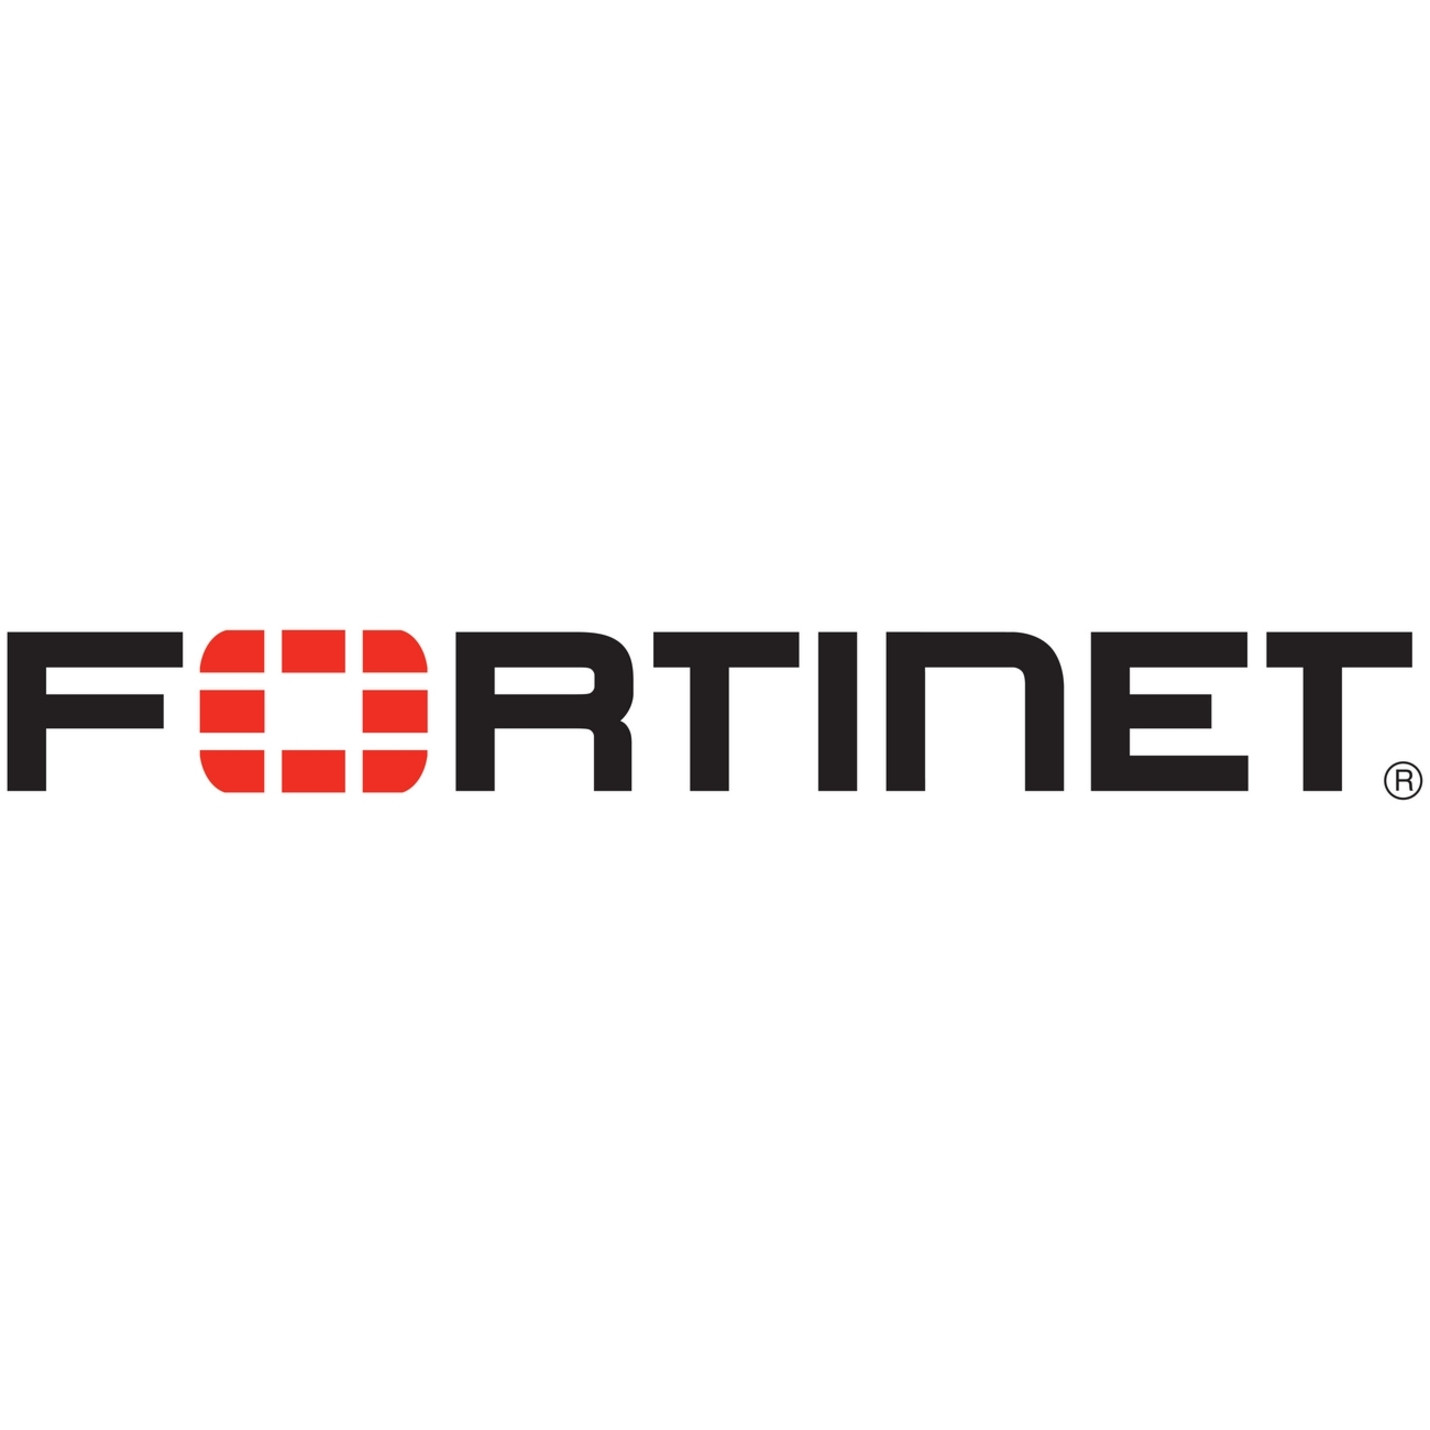 Fortinet Ceiling Mount for Wireless Access Point10 FAP-200-MNT-10